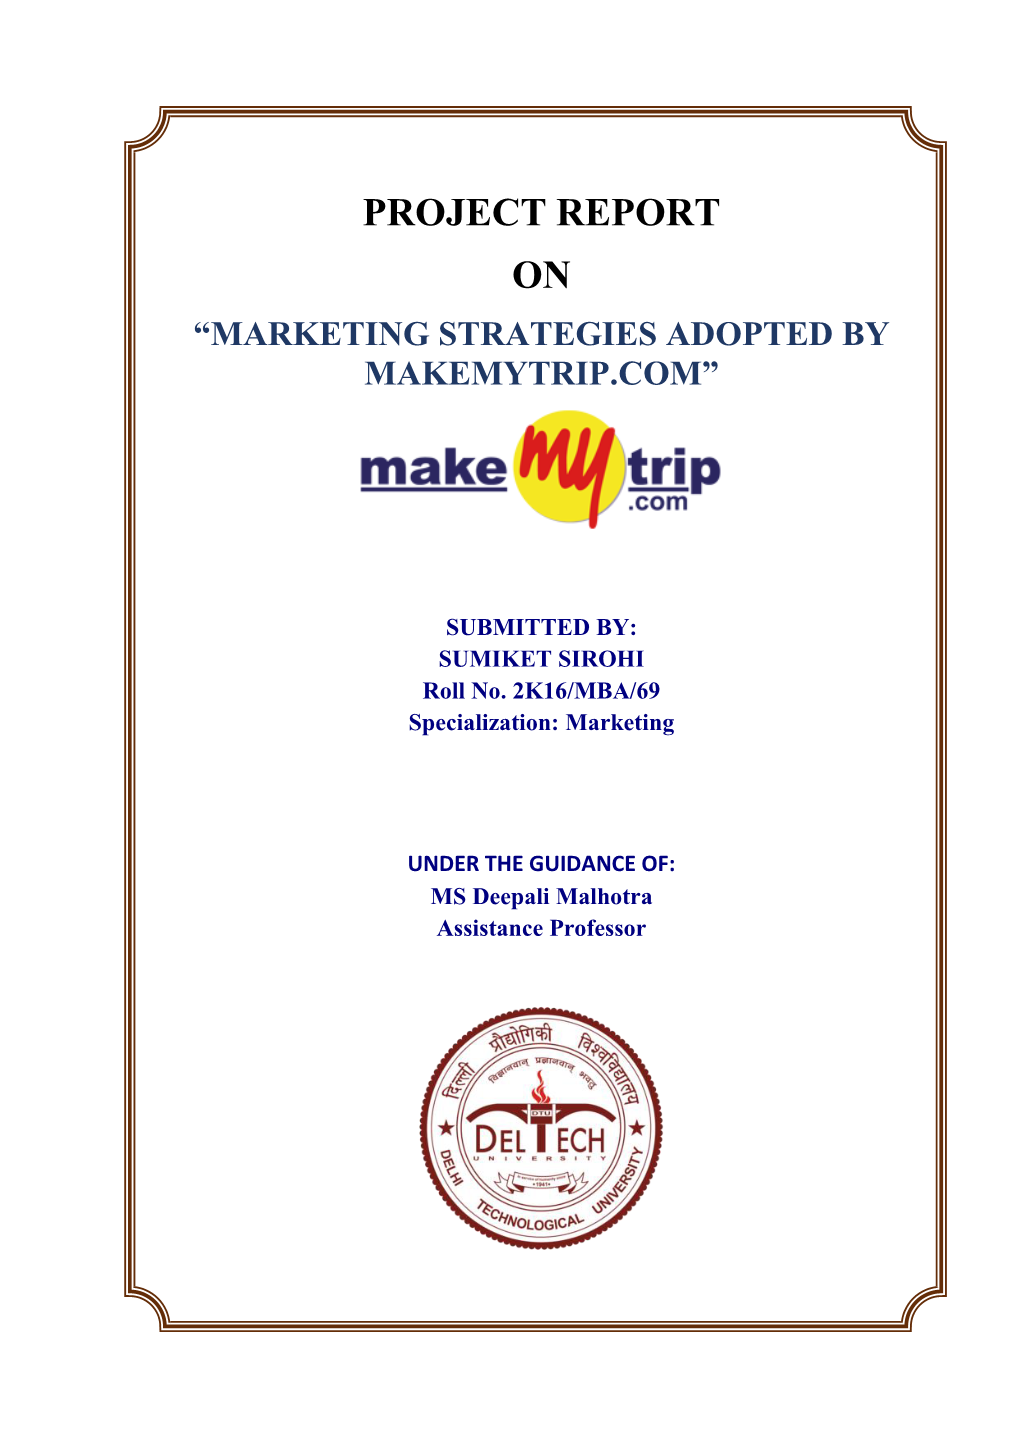 Project Report on “Marketing Strategies Adopted by Makemytrip.Com”